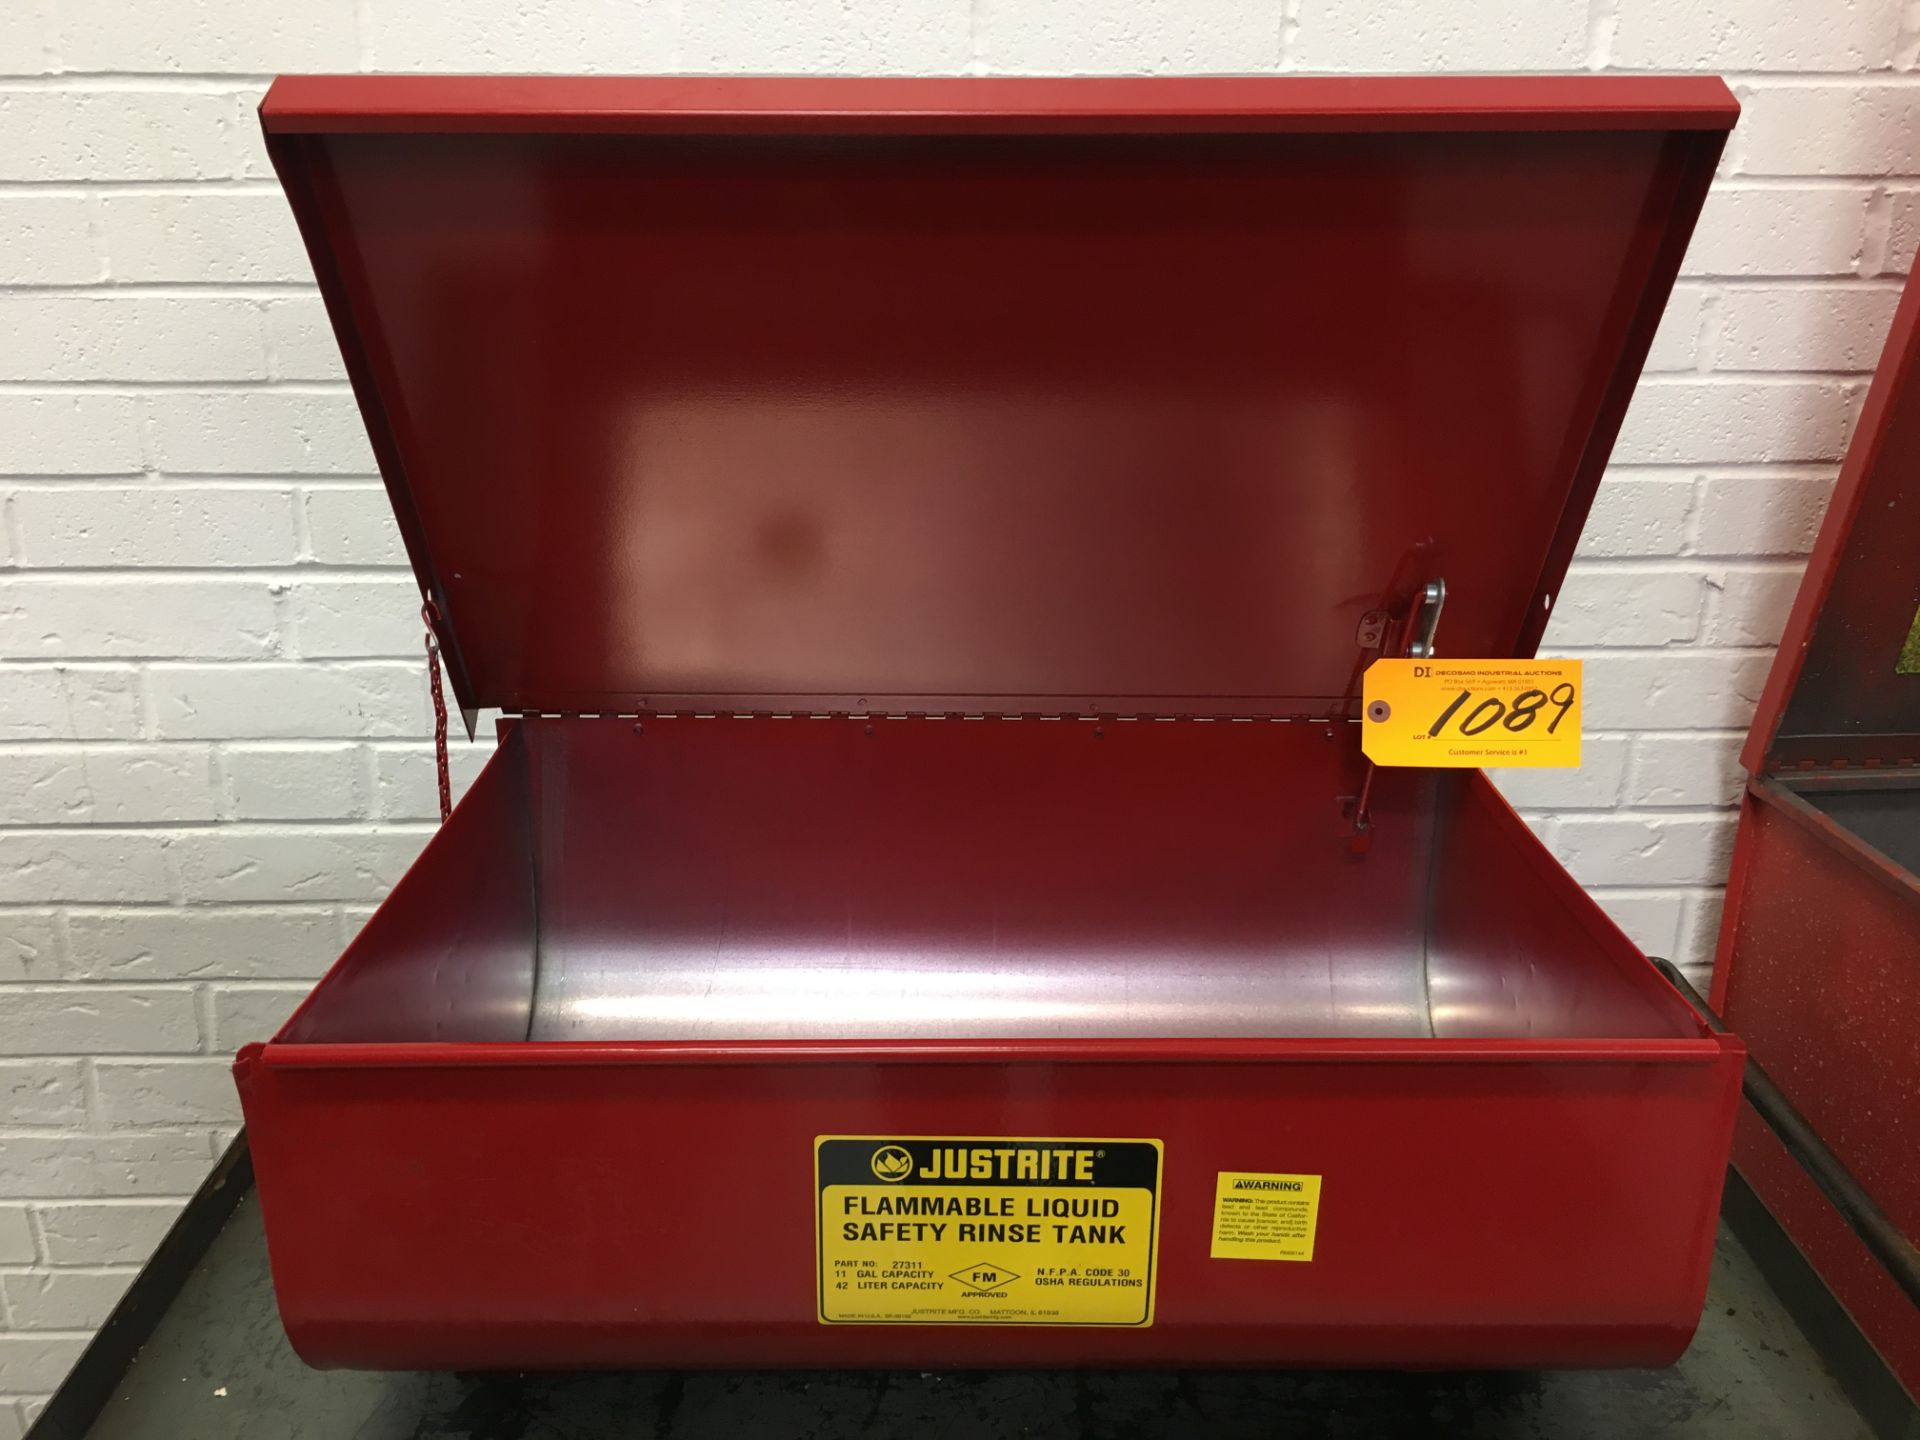 JUSTRITE FLAMMABLE LIQUID SAFETY RINSE TANK